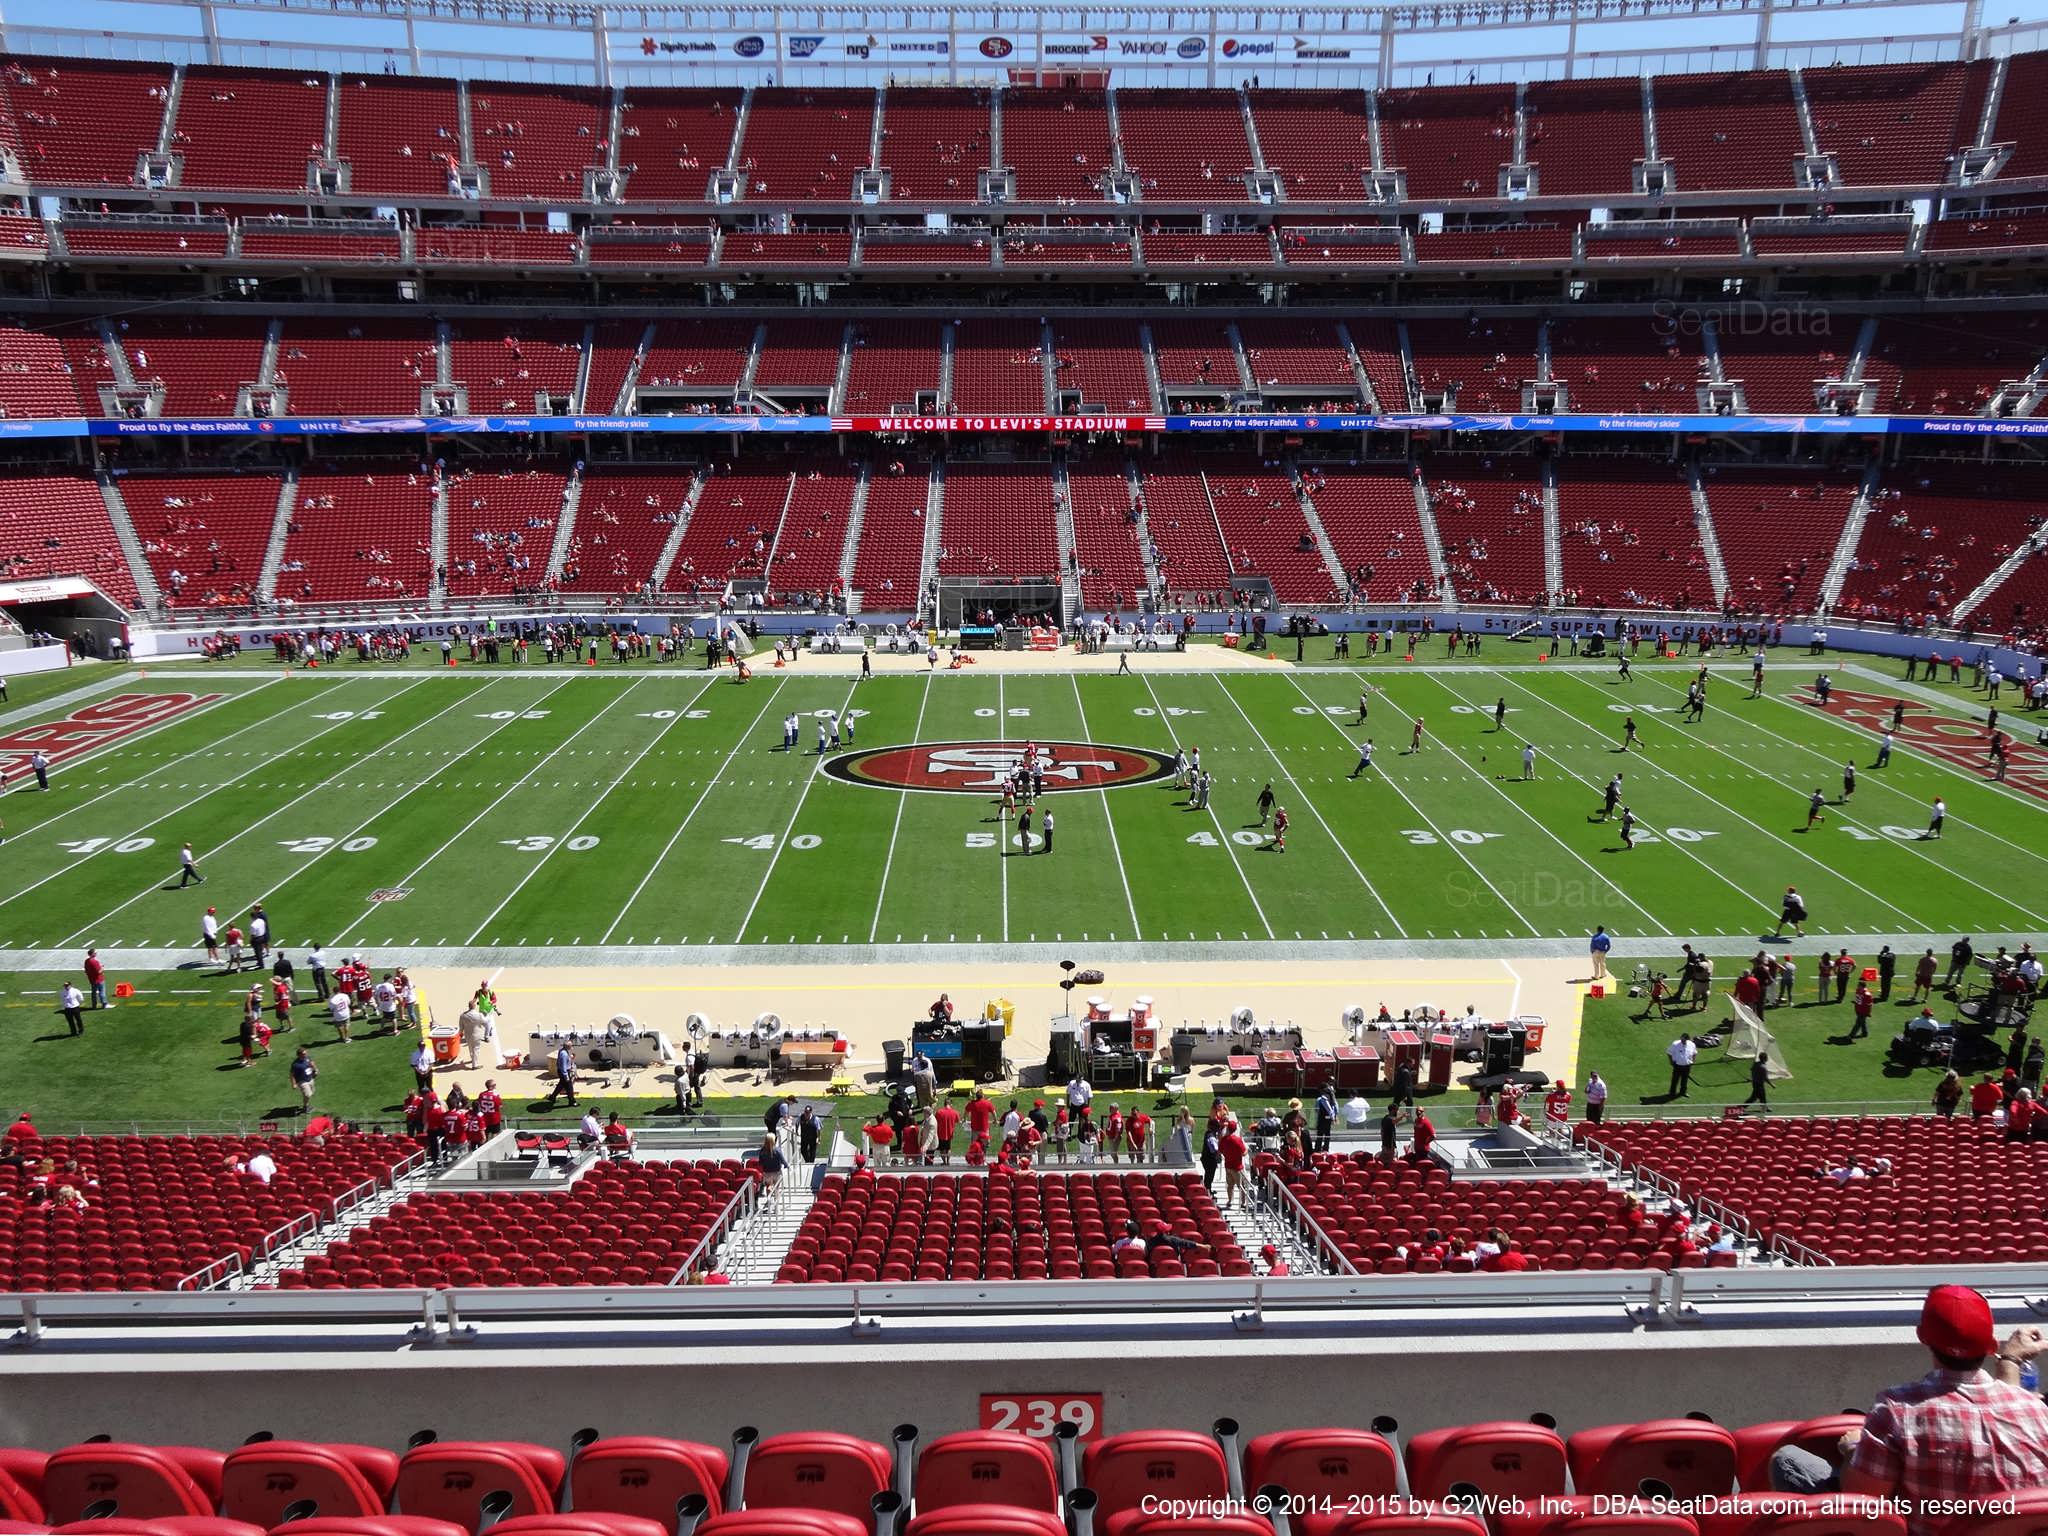 Seat view from section 239 at Levi’s Stadium, home of the San Francisco 49ers